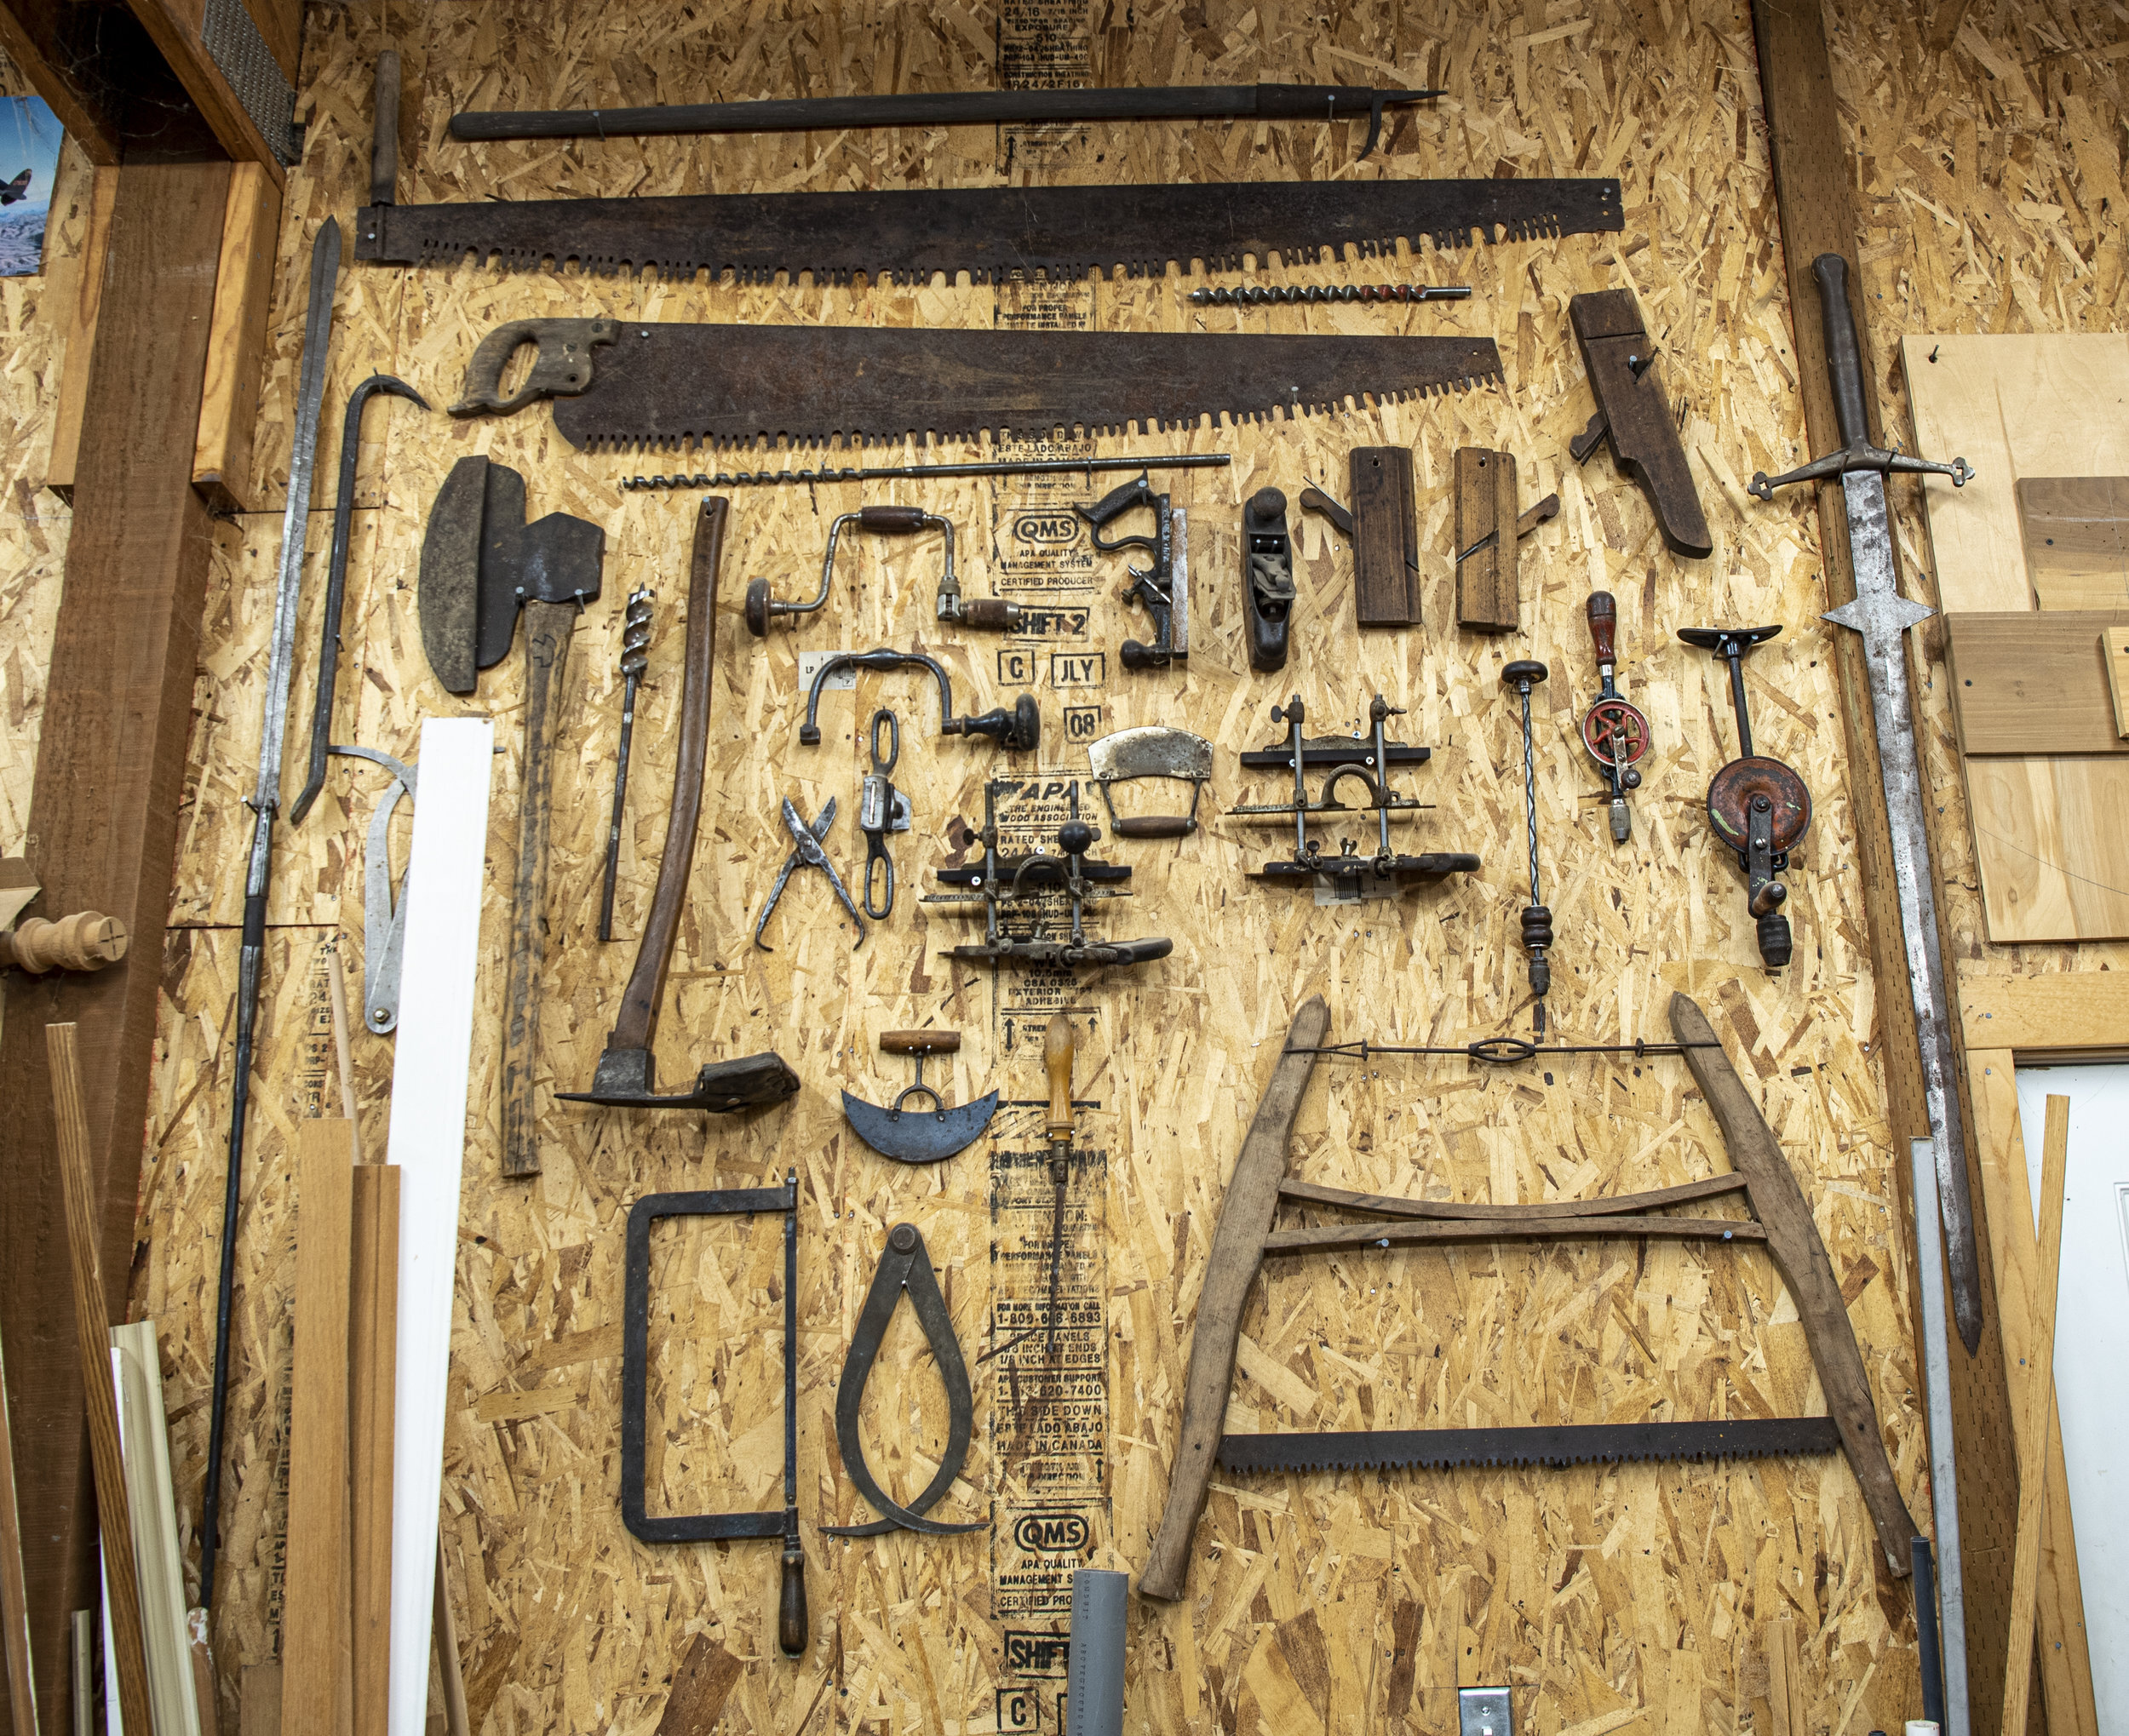 ANTIQUE TOOL COLLECTION